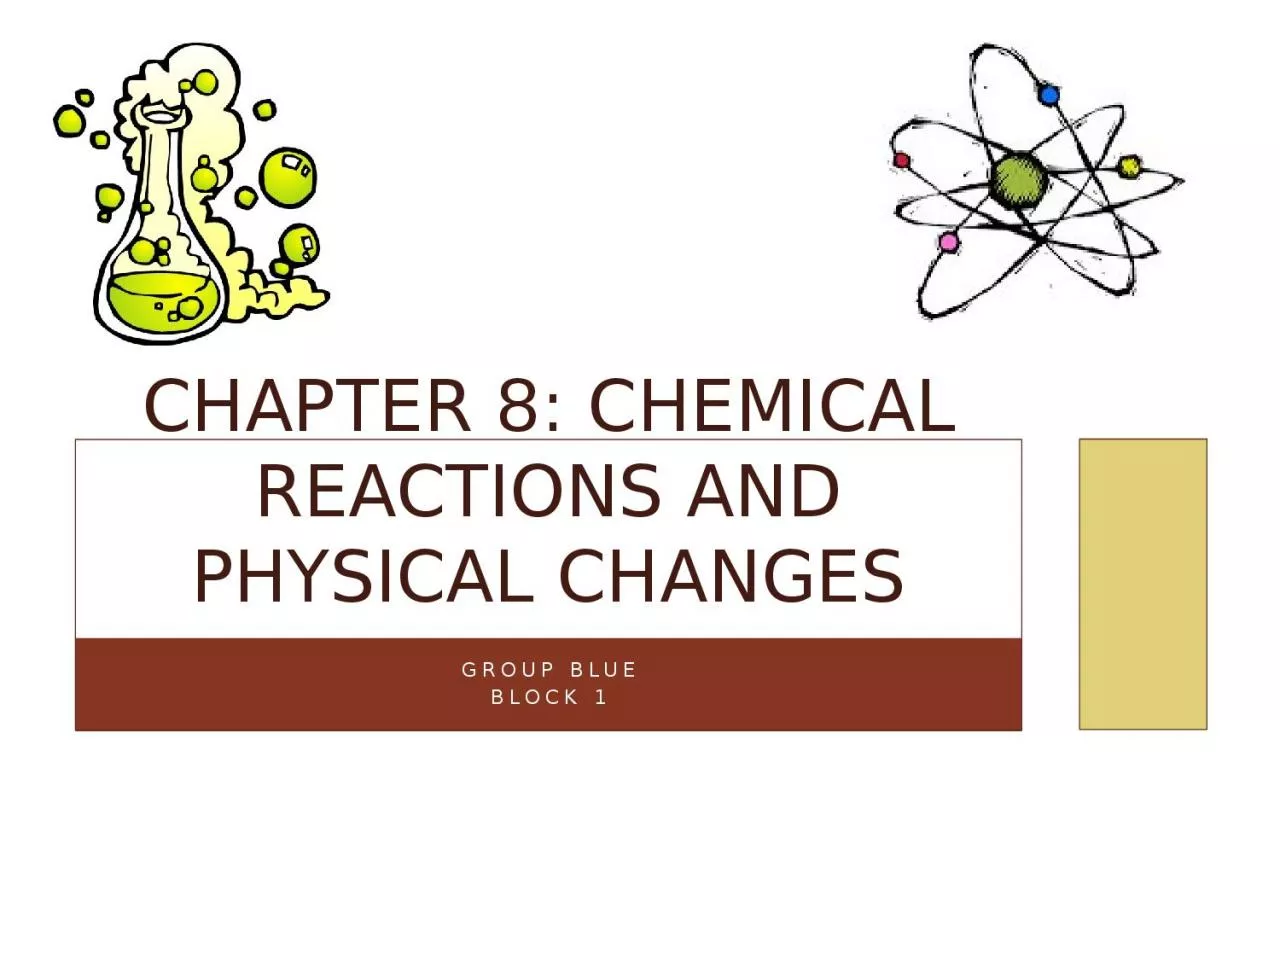 Group Blue Block 1 Chapter 8: Chemical Reactions and Physical Changes